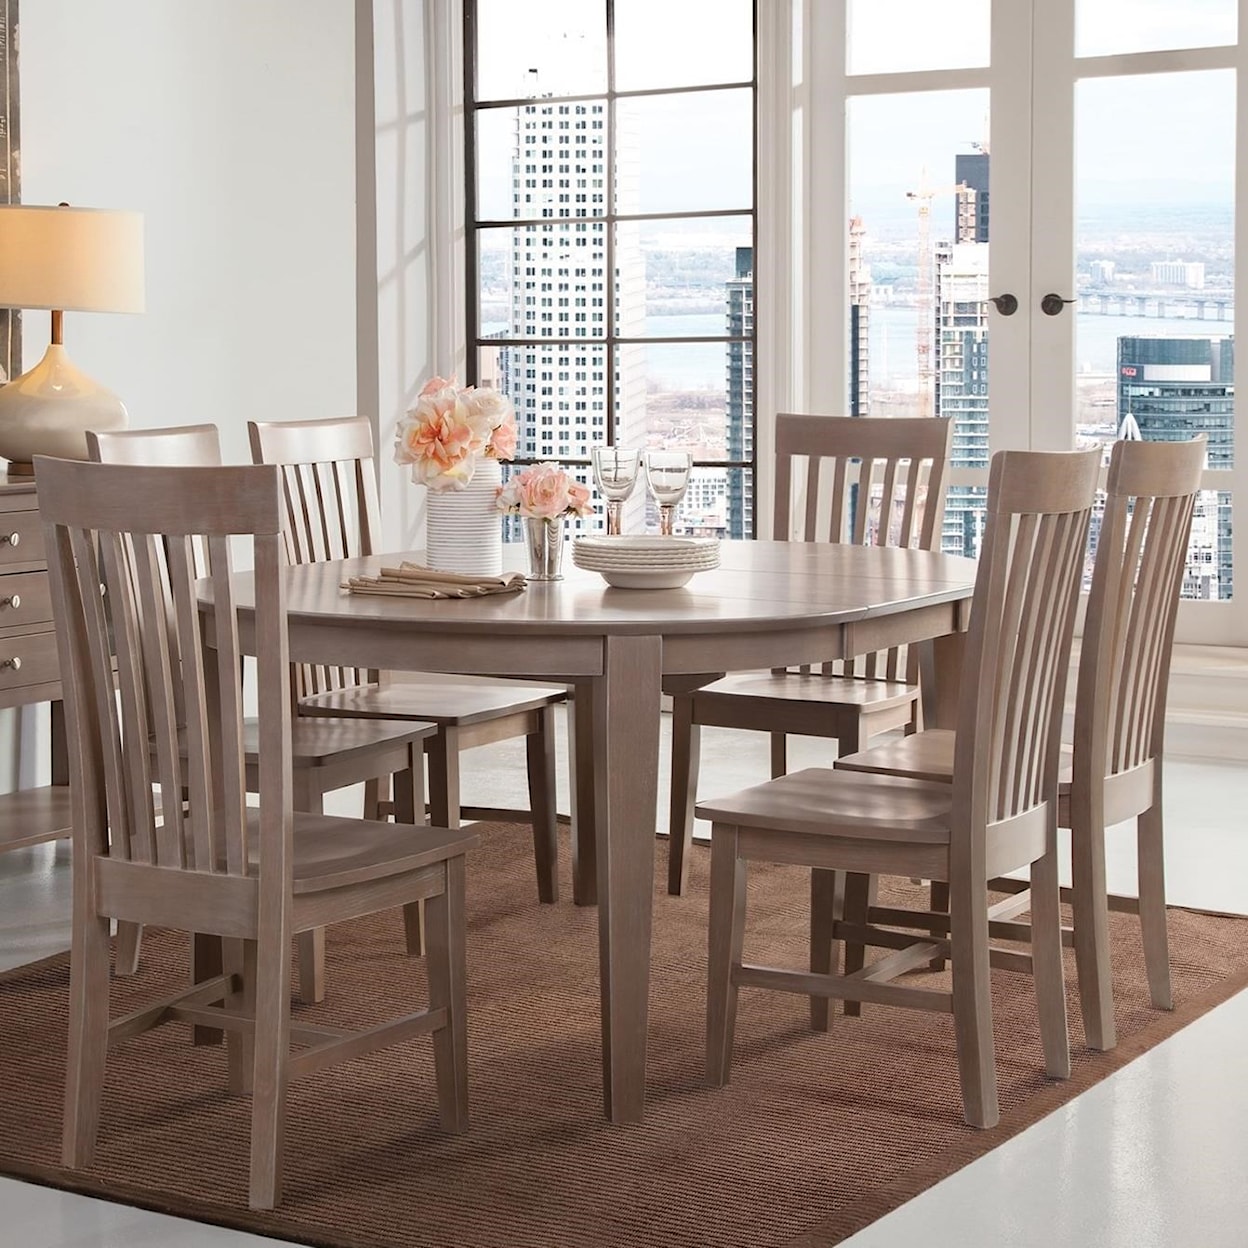 Carolina Dinette Cosmopolitan Table and Chair Set